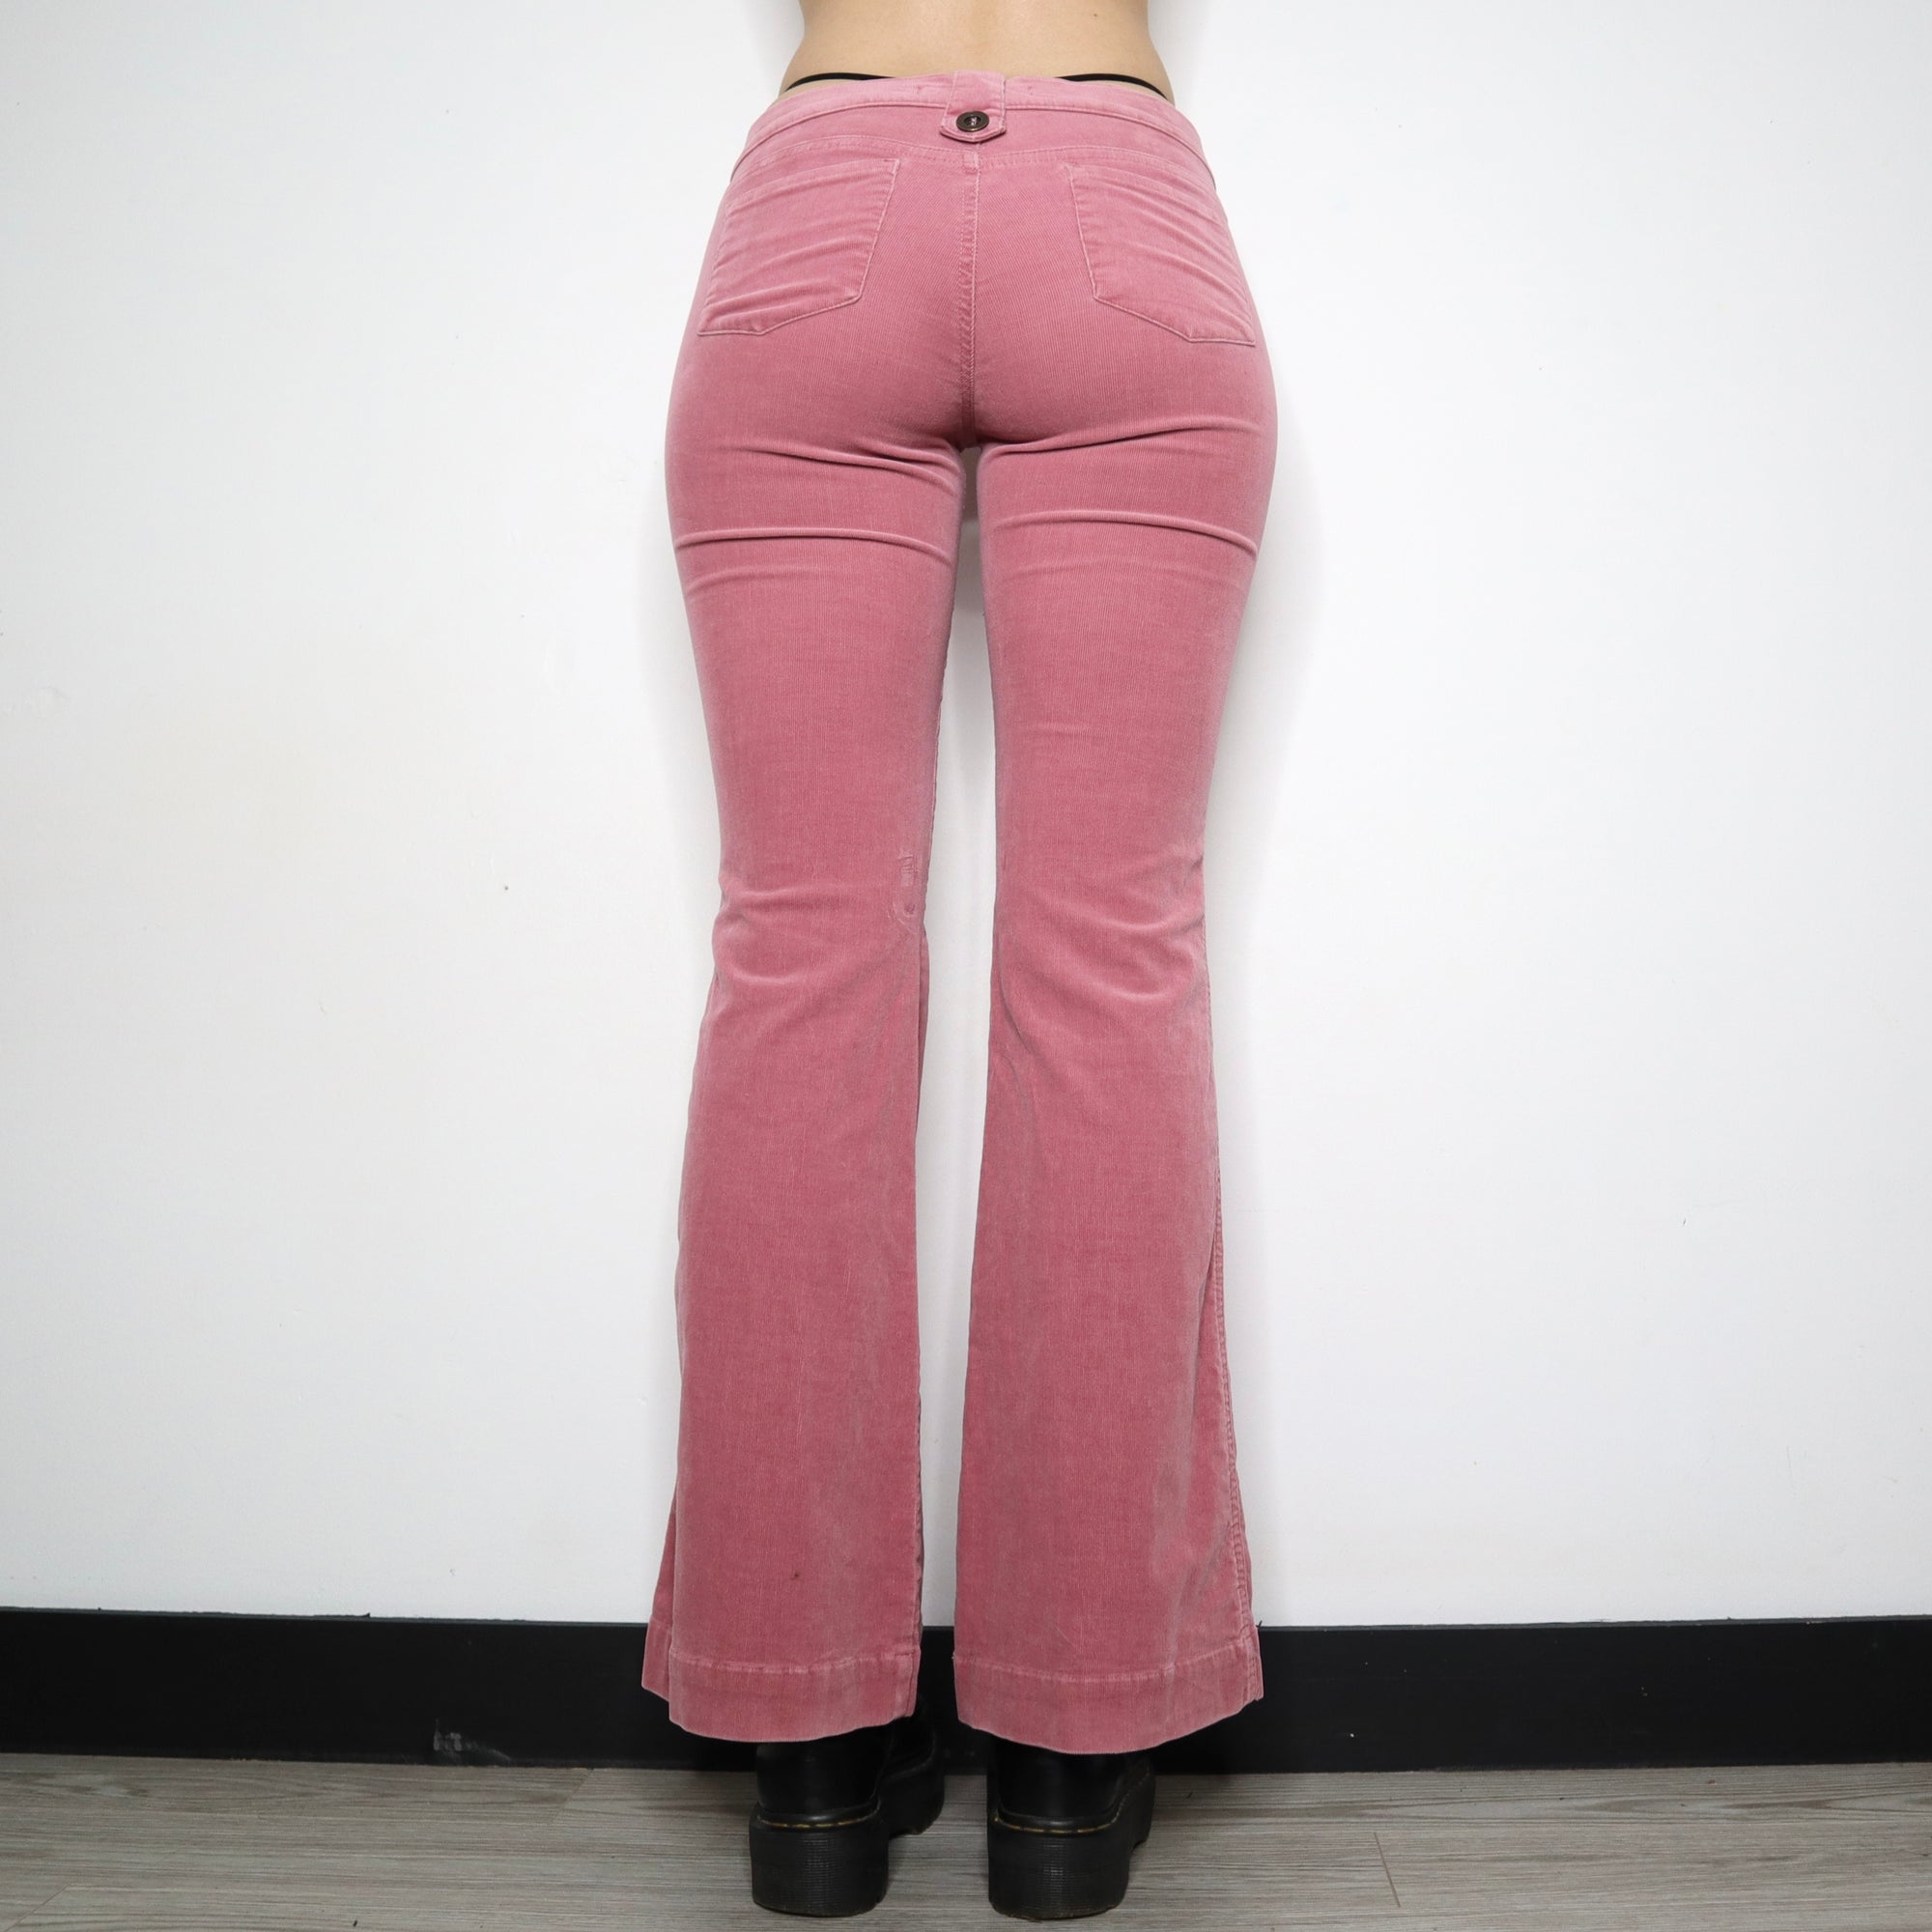 Vintage Early 2000s Dusty Pink Low Rise Corduroy Flare Pants